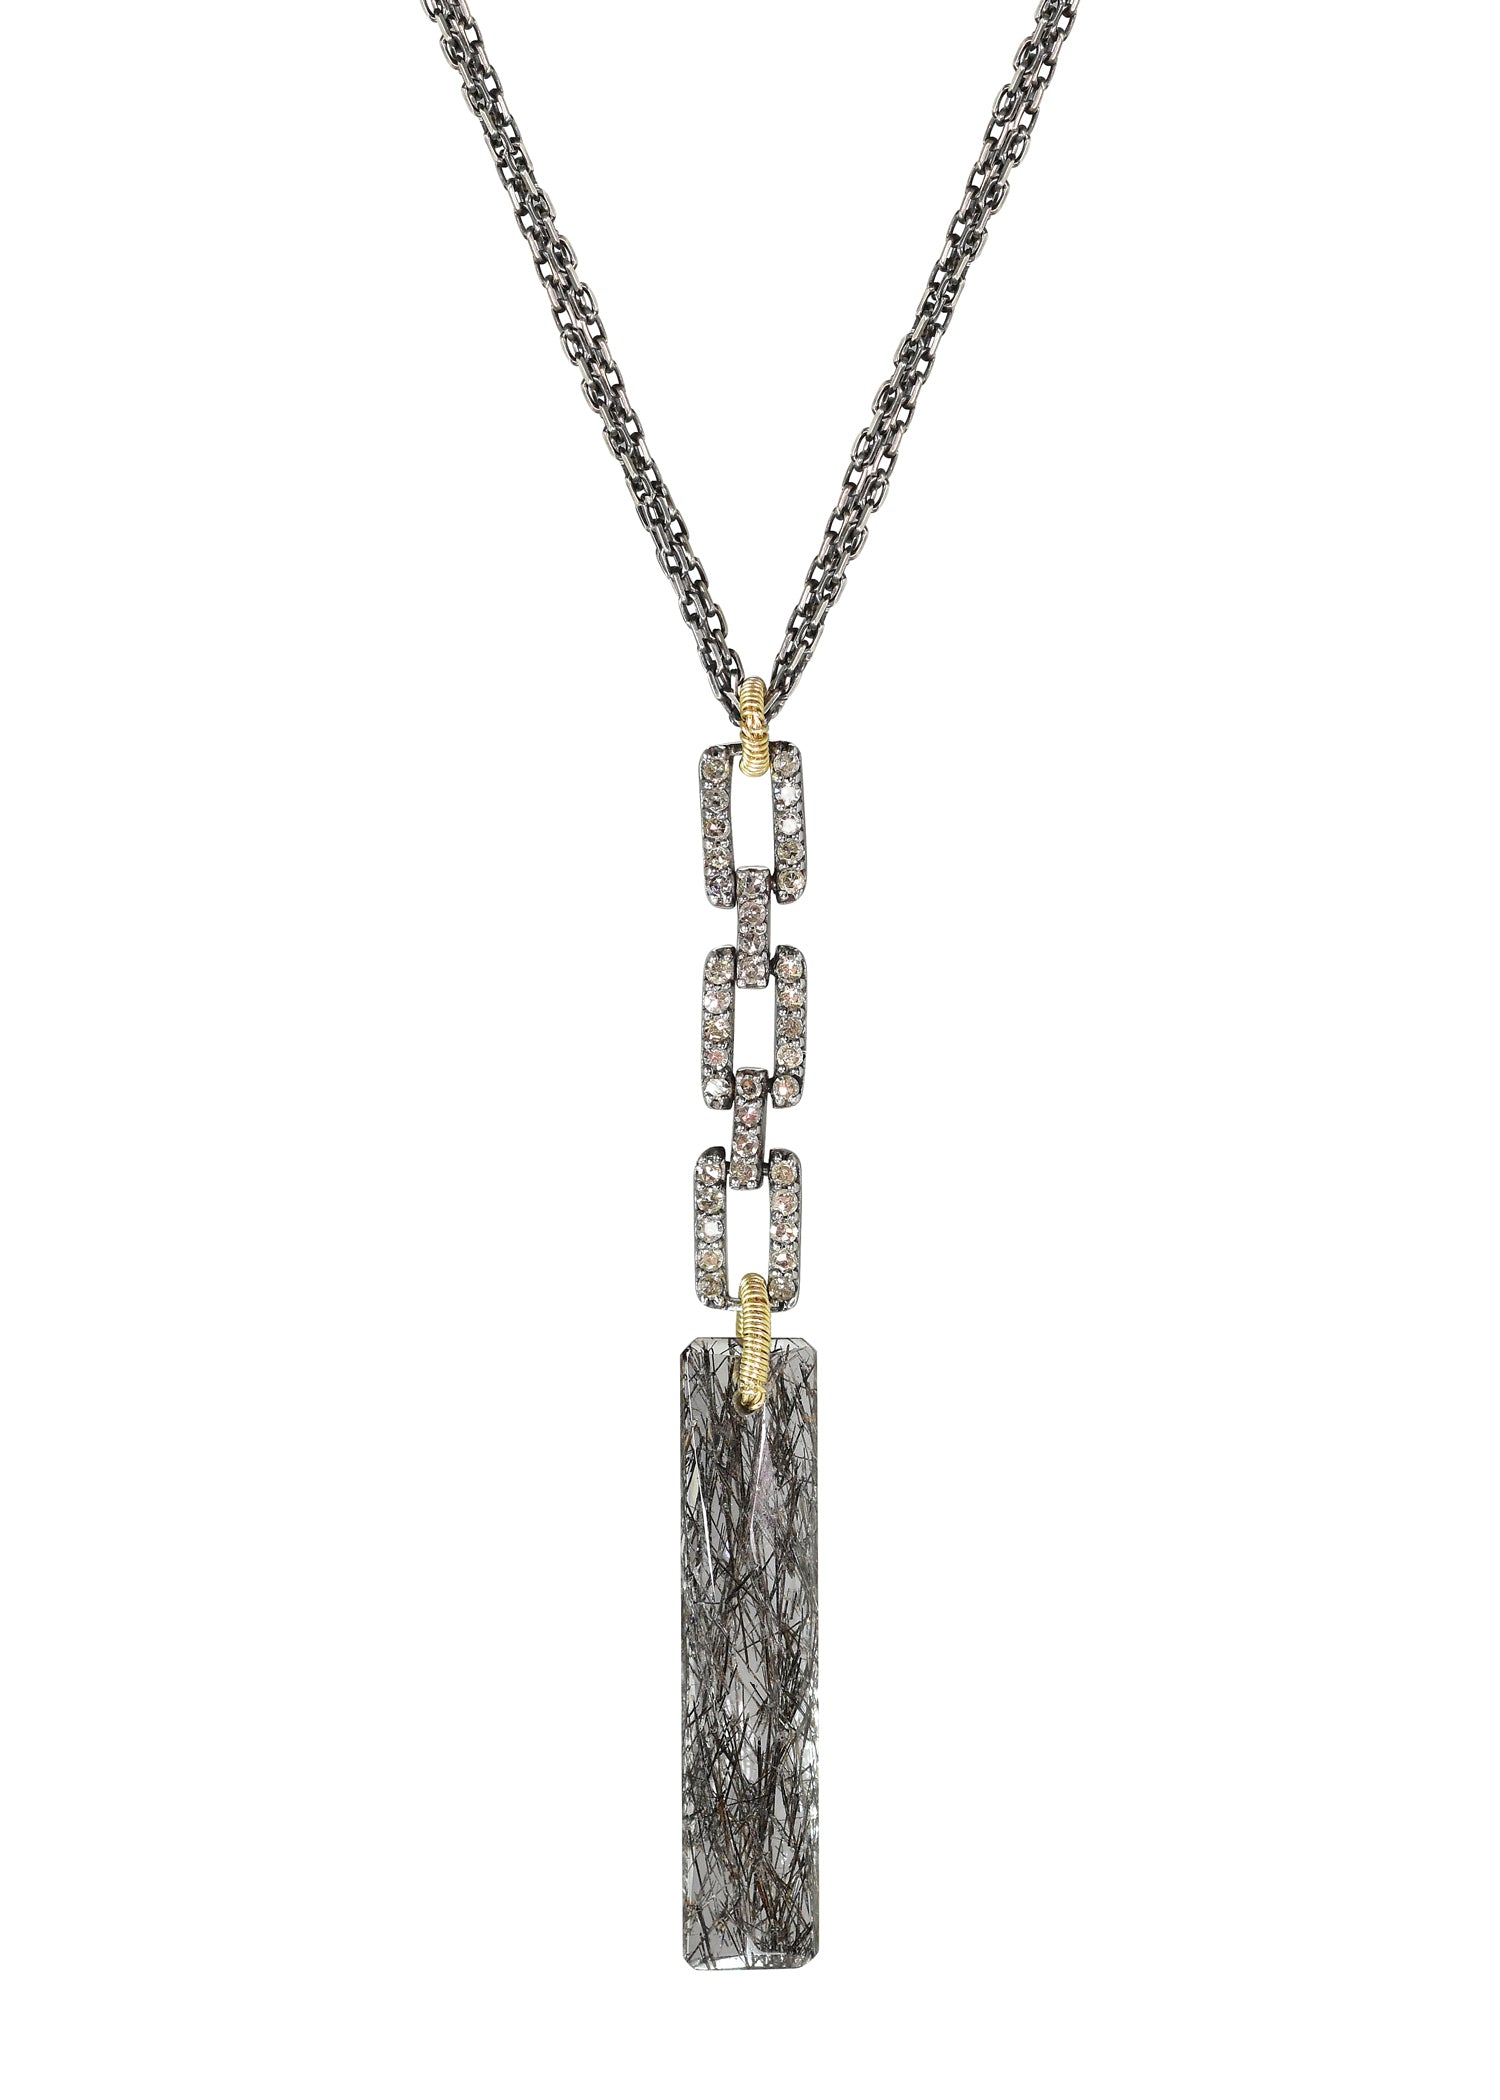 Diamond Black tourmalated quartz 14k gold Sterling silver Mixed metal Special order only Triple chain measures 17" in length Pendant measures 2-1/4" in length and 1/4" in width at the widest point Handmade in our Los Angeles studio